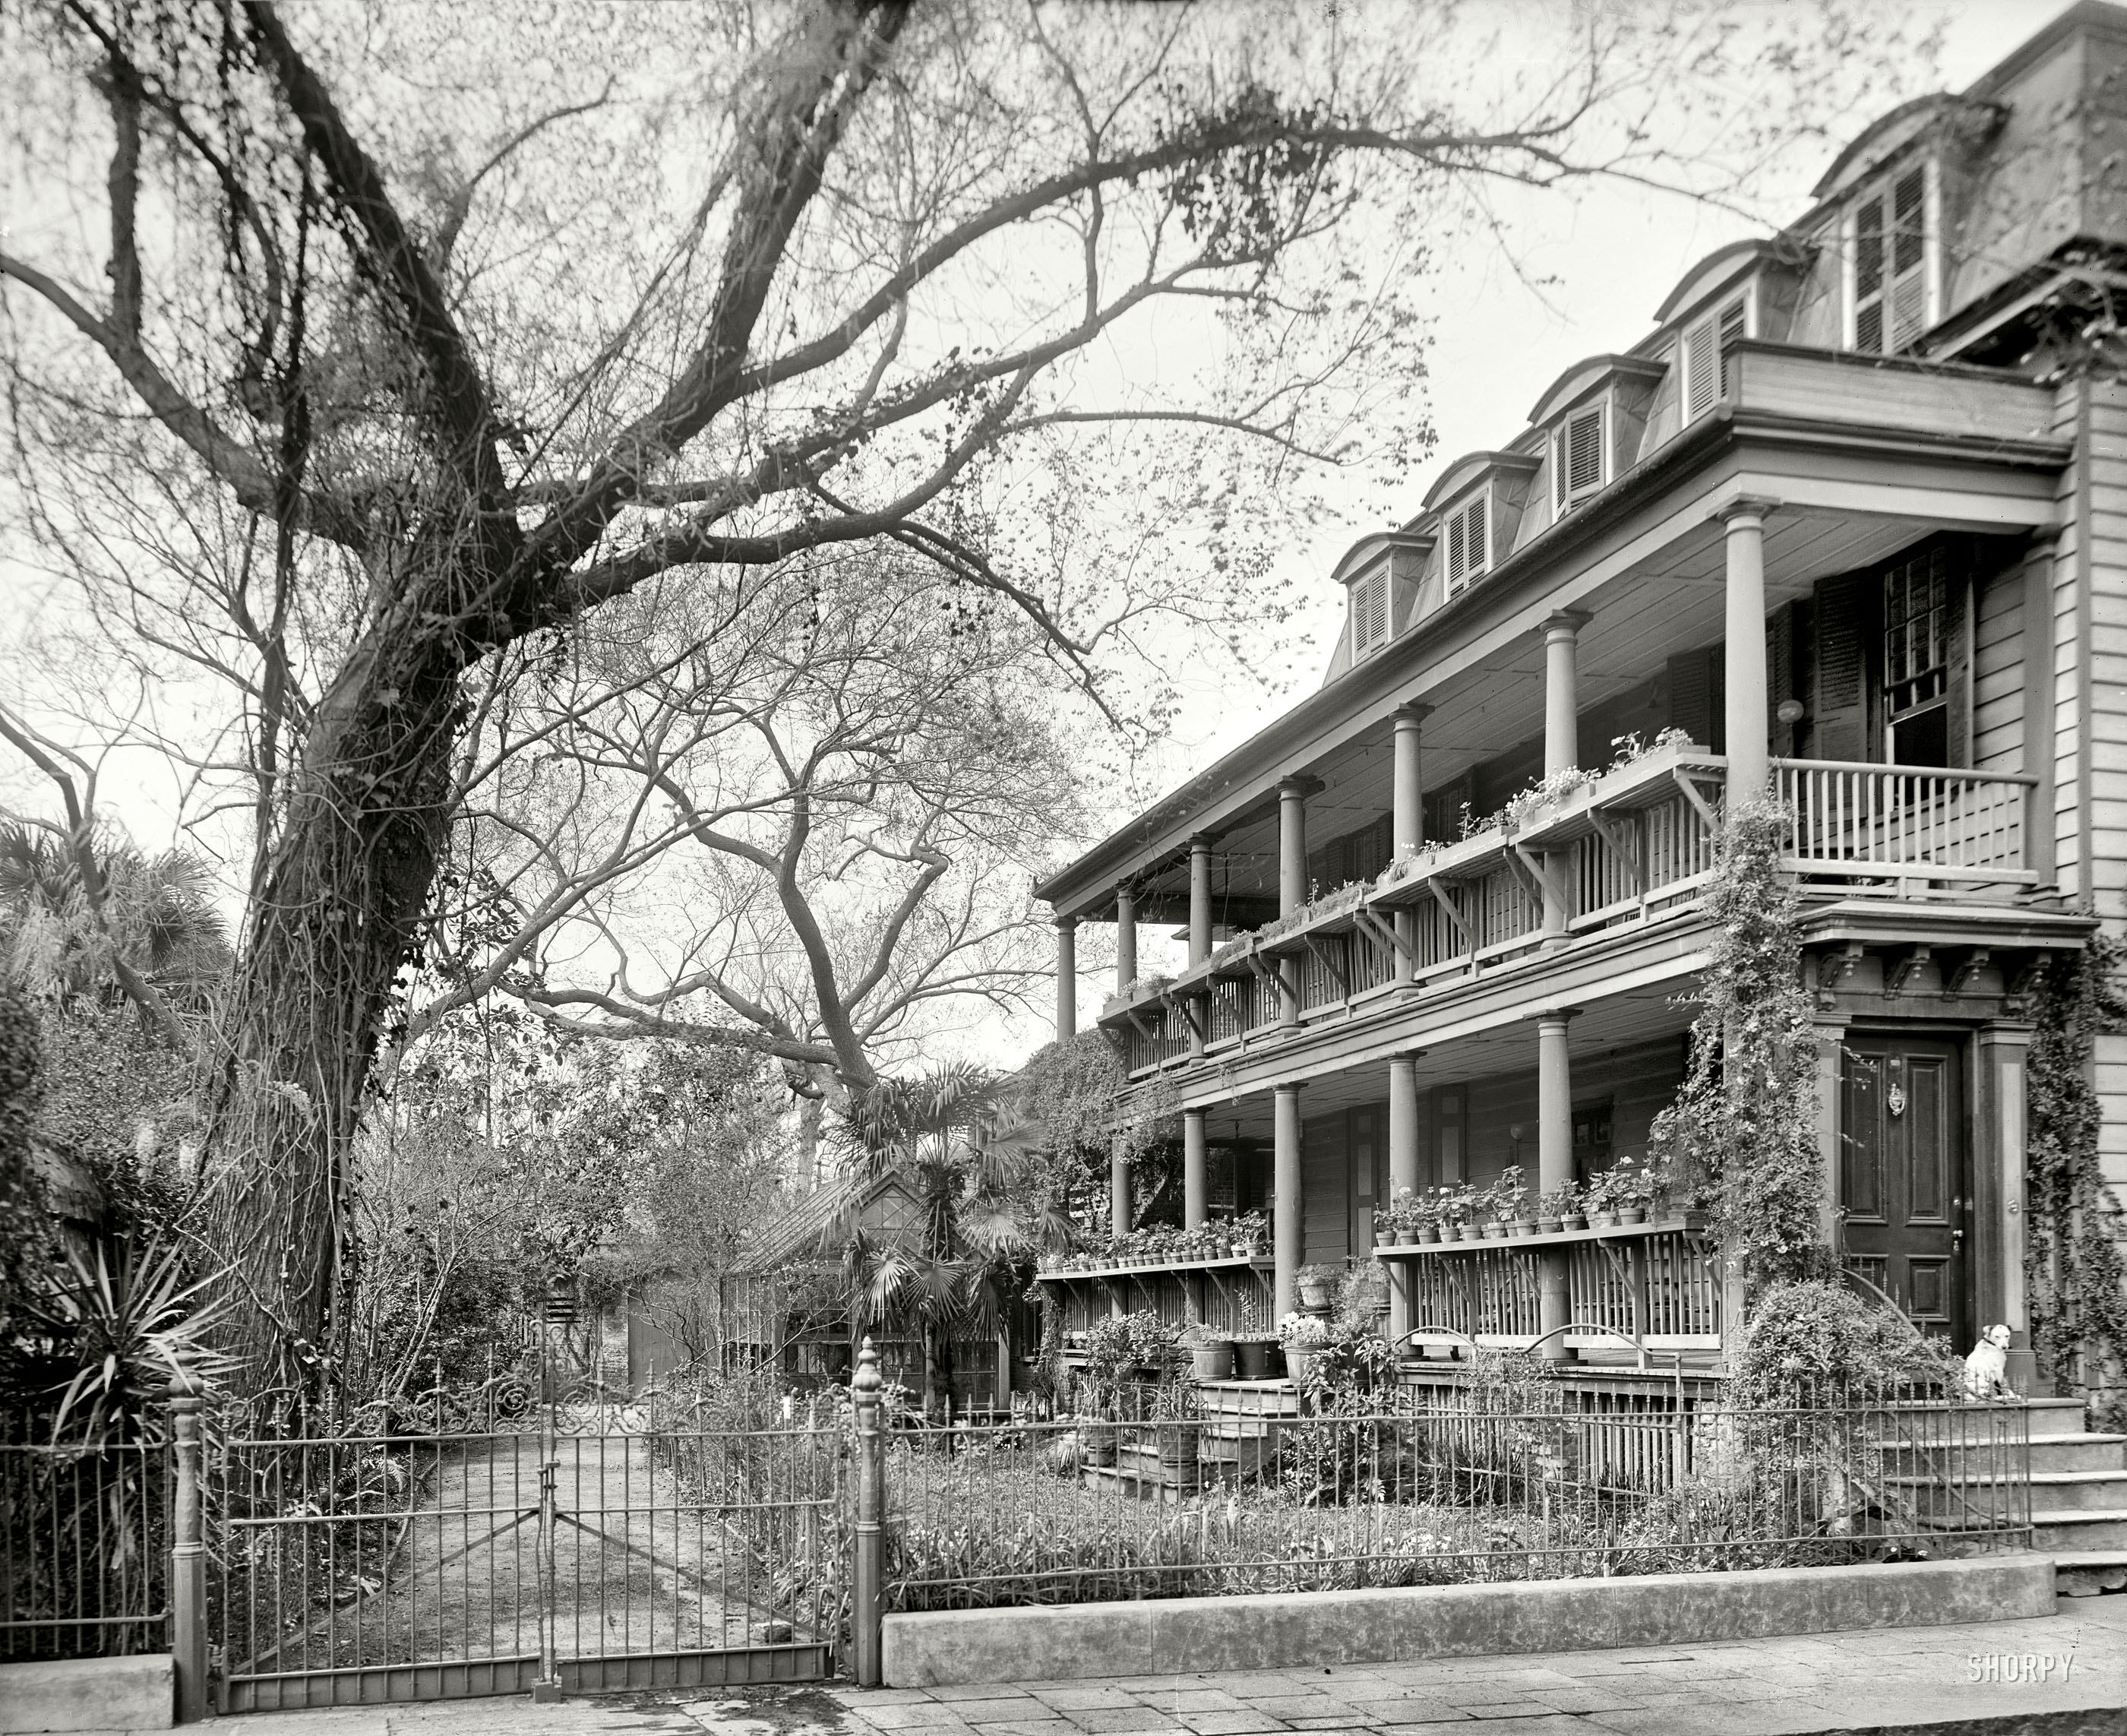 Charleston, South Carolina, circa 1910. "35 Legare Street -- gallery and garden." And dog. 8x10 inch dry plate glass negative, Detroit Publishing Company. View full size.